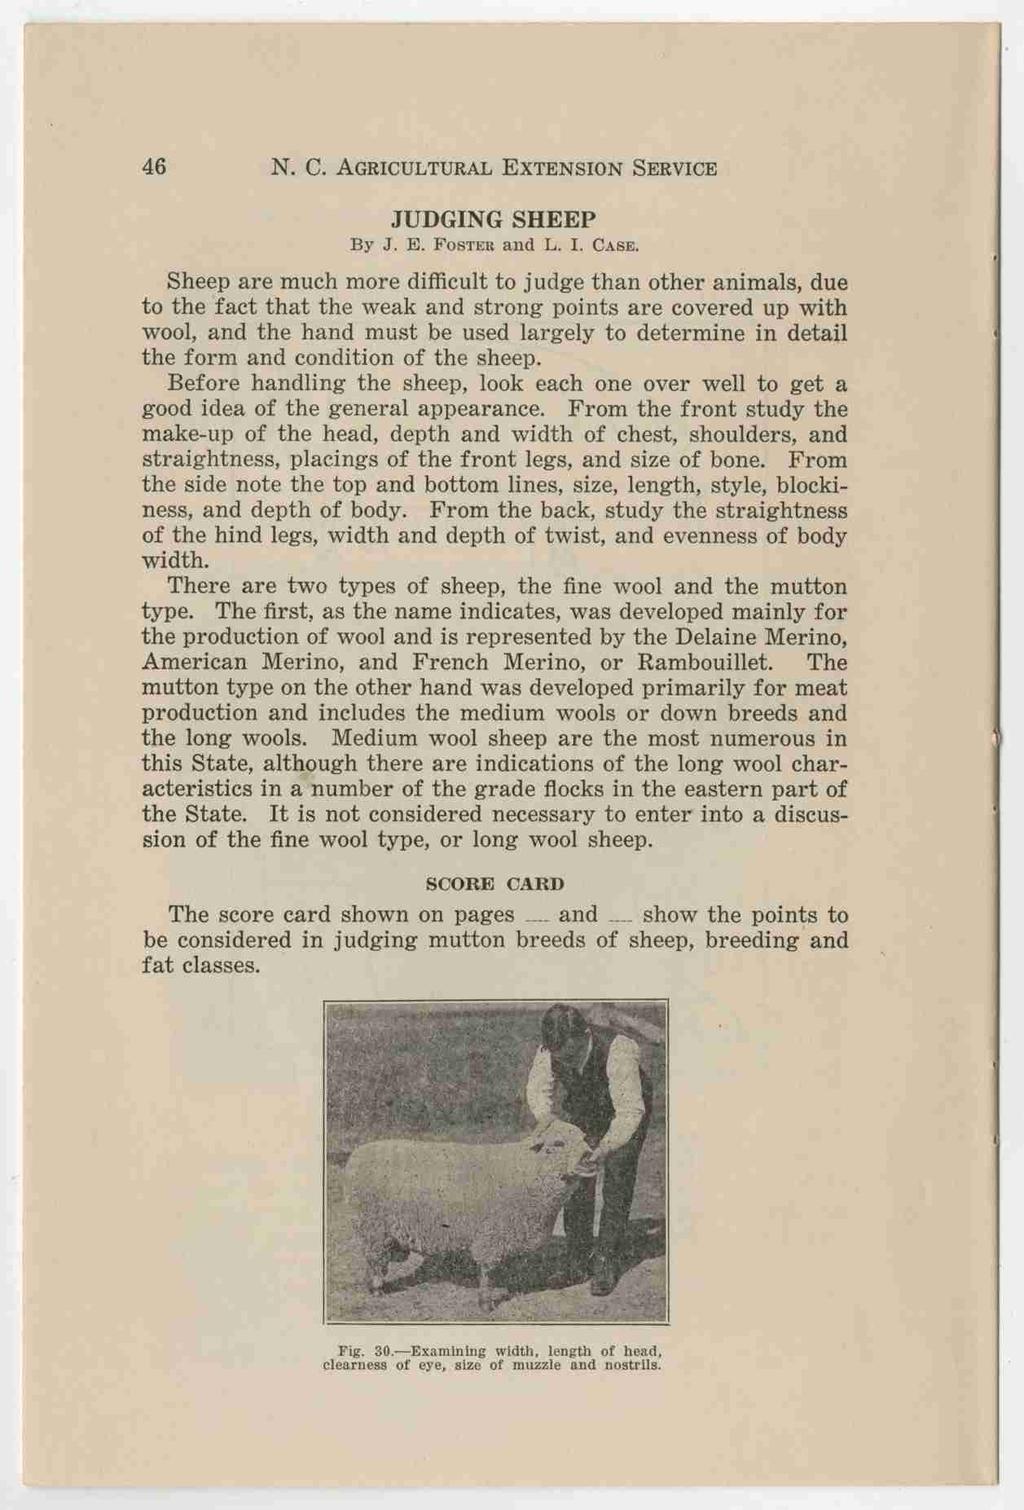 46 N. C. AGRICULTURAL EXTENSION SERVICE JUDGING SHEEP By J. E. FOSTER and L. I. CASE.